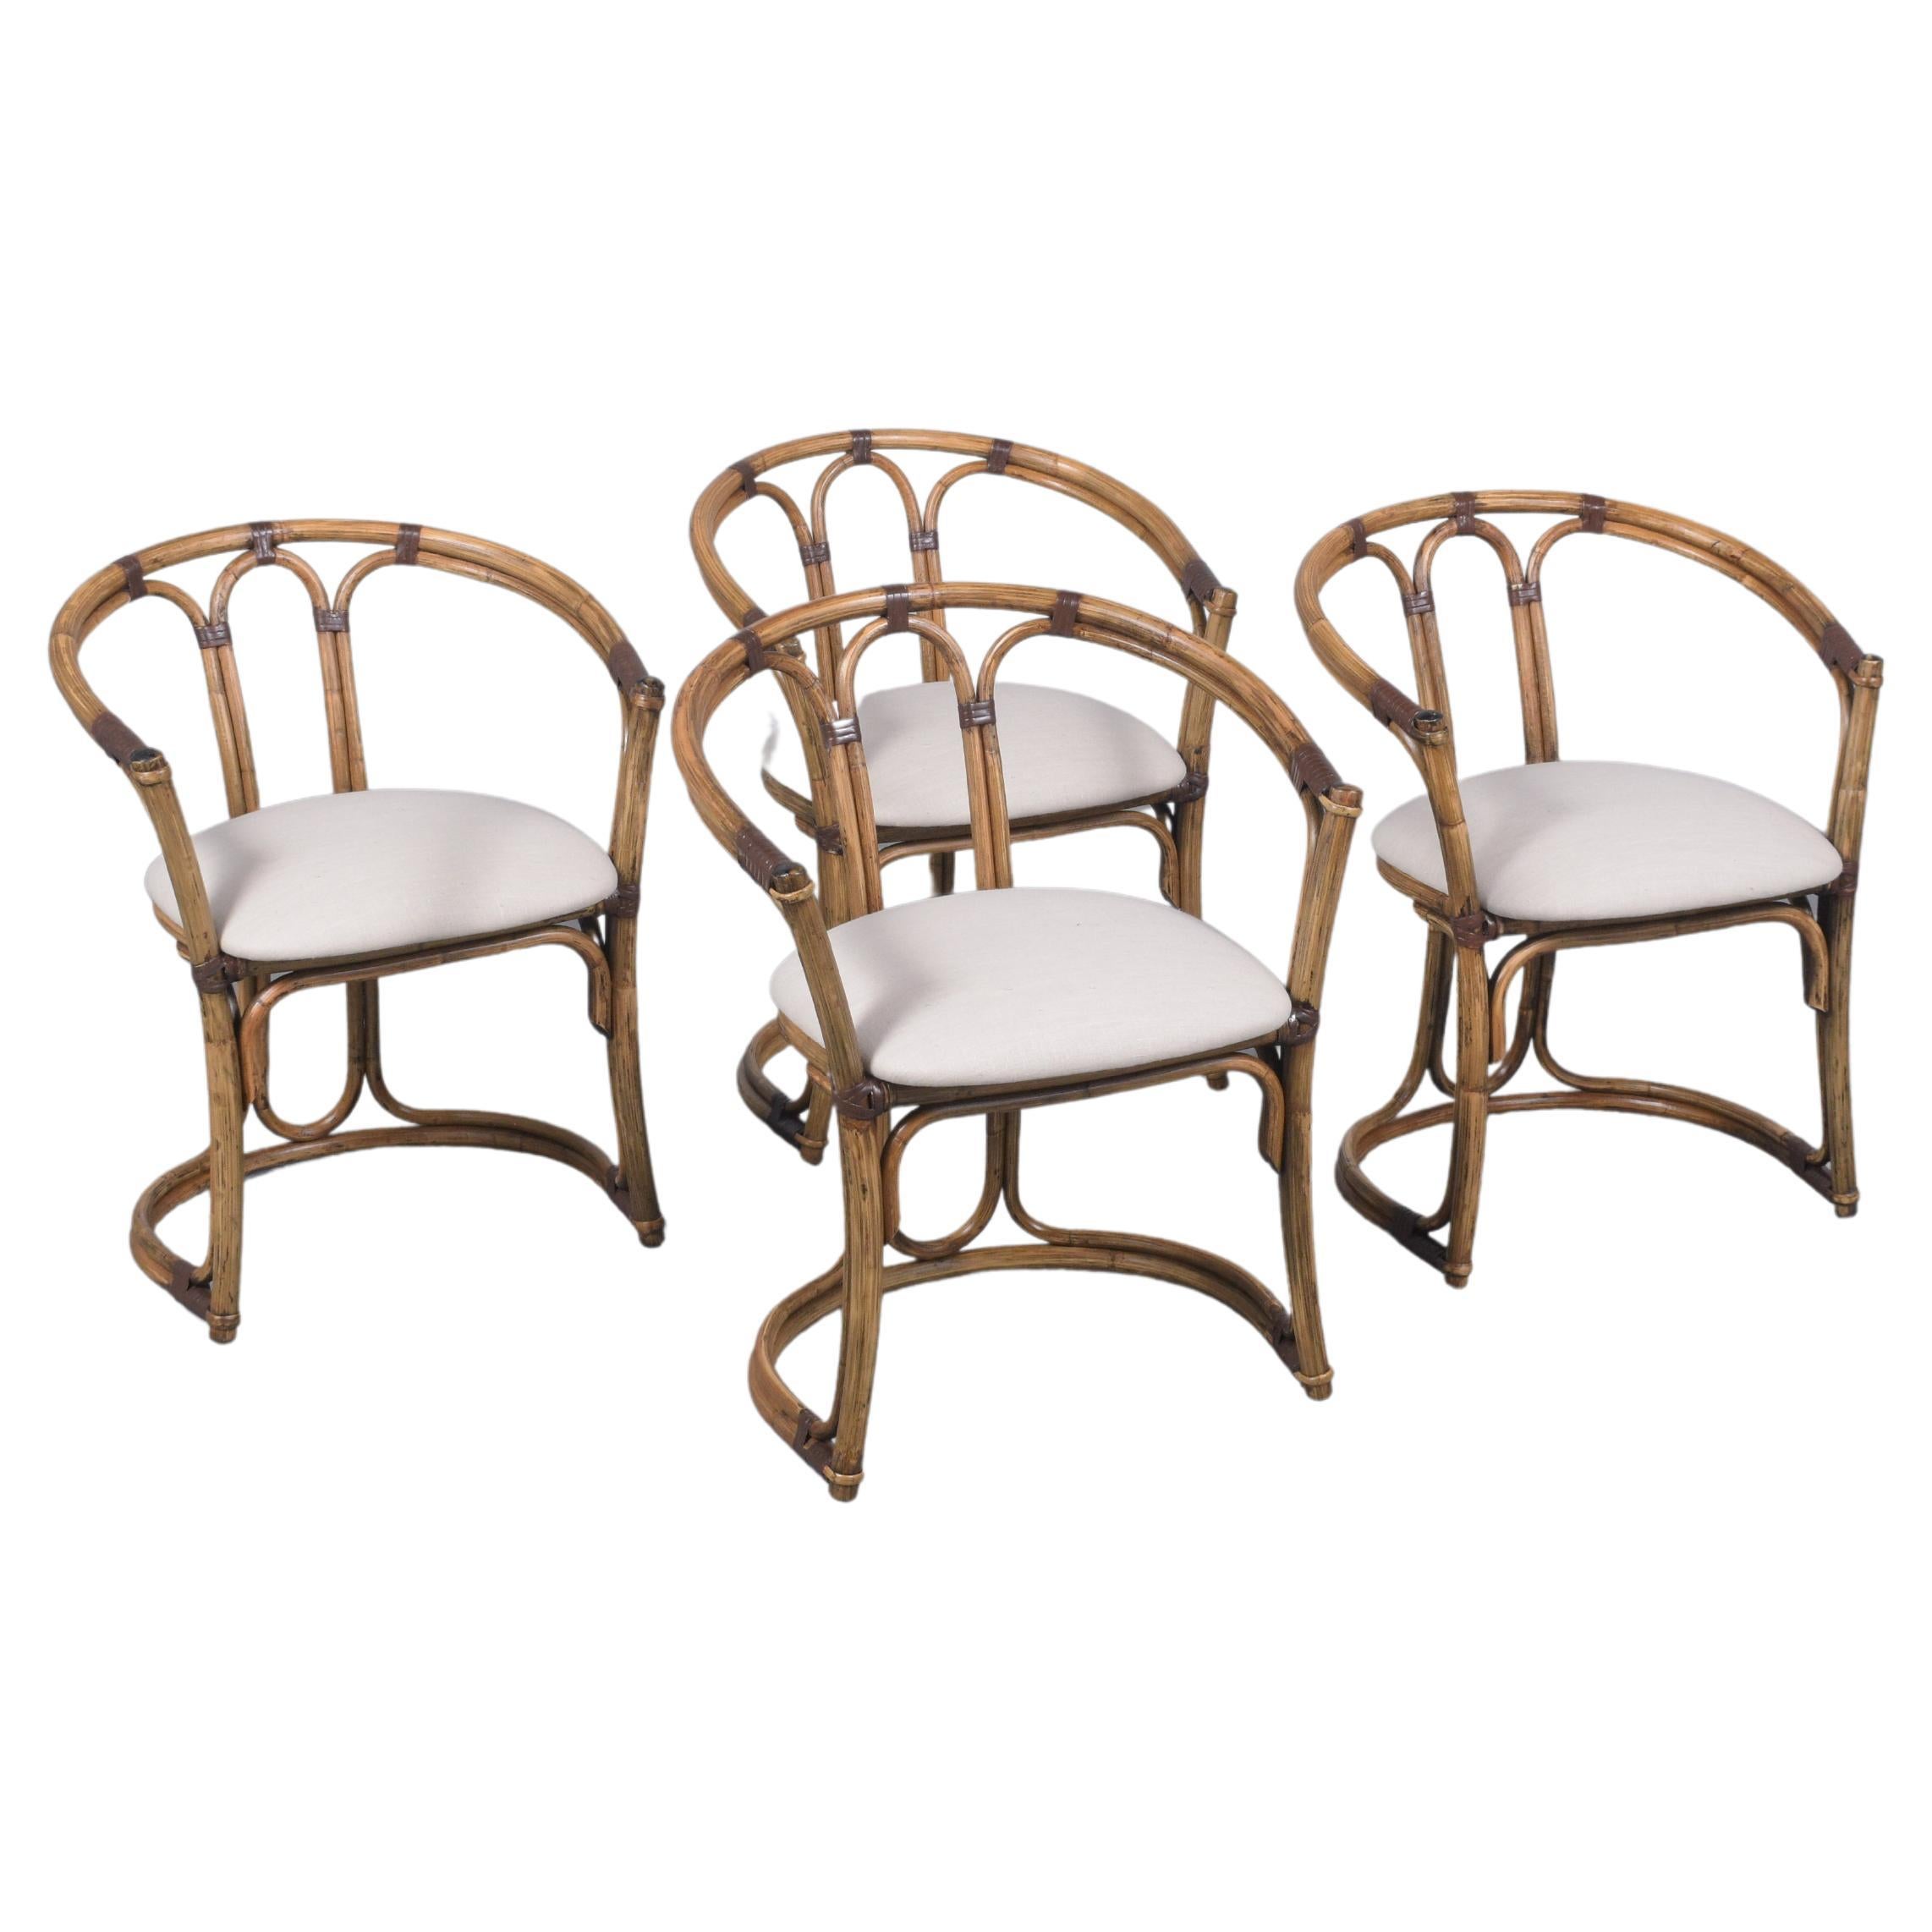 Explore the unique allure of our set of four vintage bamboo barrel chairs, beautifully crafted and thoughtfully restored by our expert in-house professionals. These chairs retain their natural bamboo color, enhanced with rich brown details and a